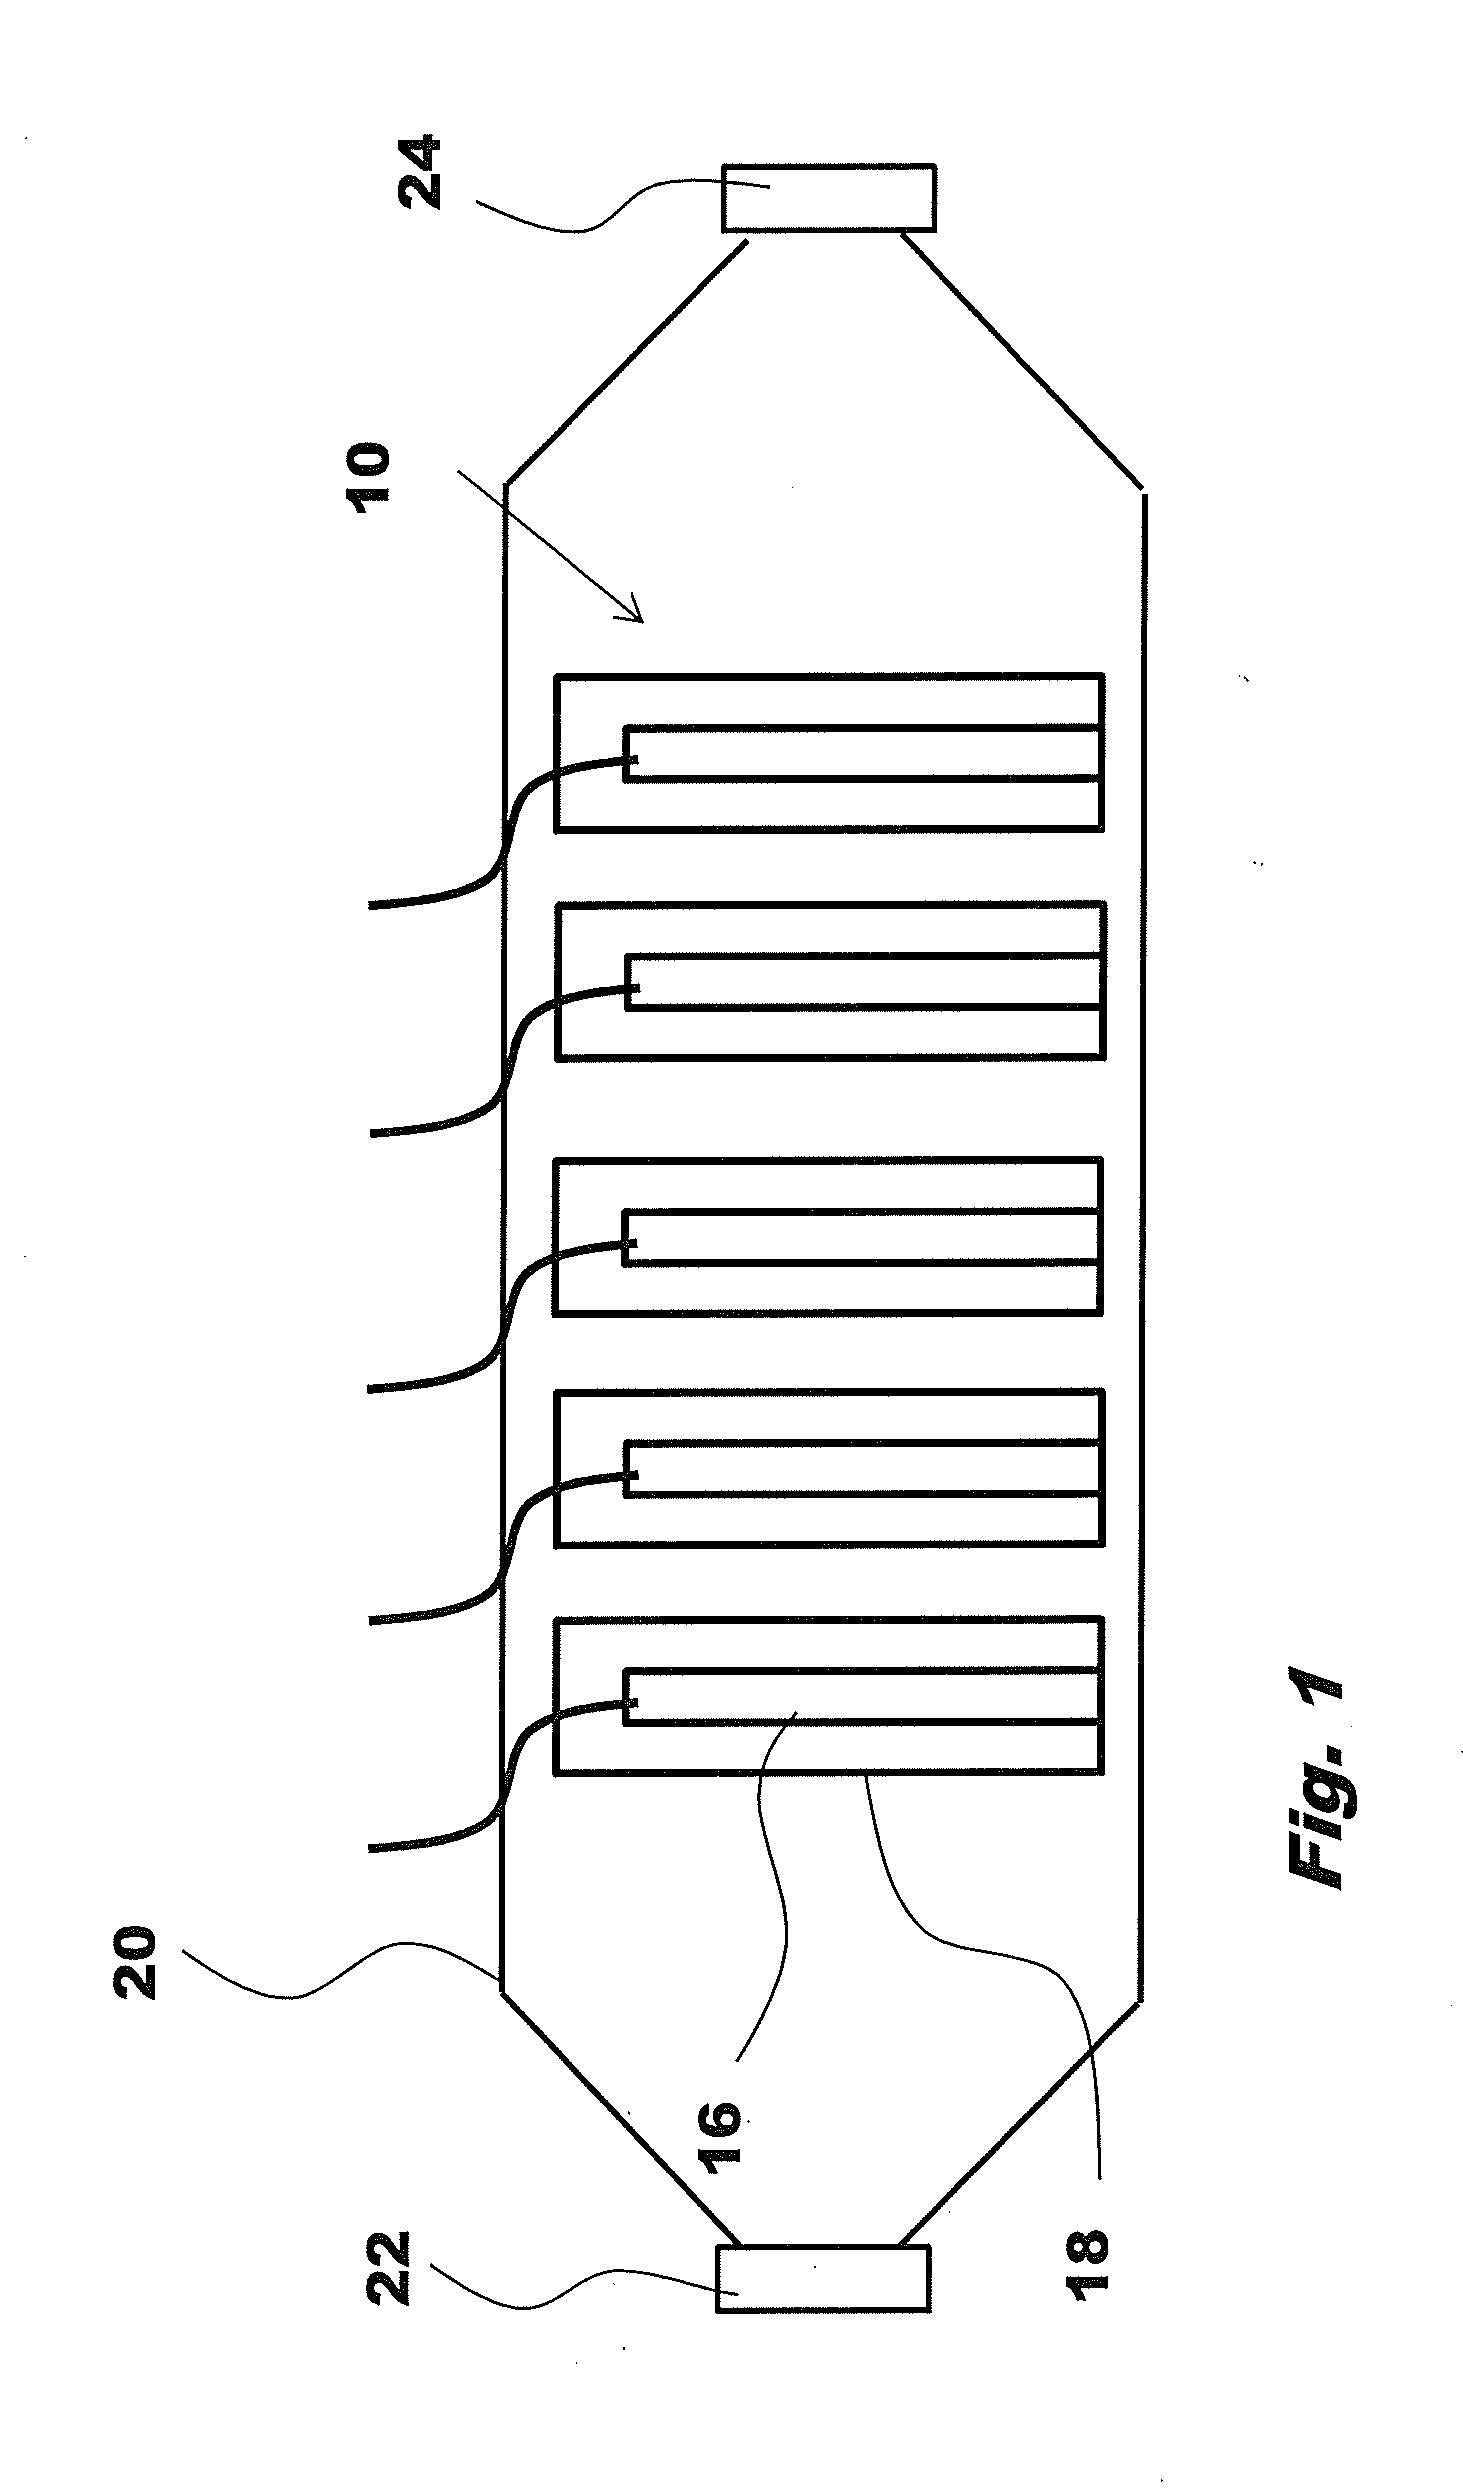 Method and Device for Treating Opaque Fluids with UV Radiation